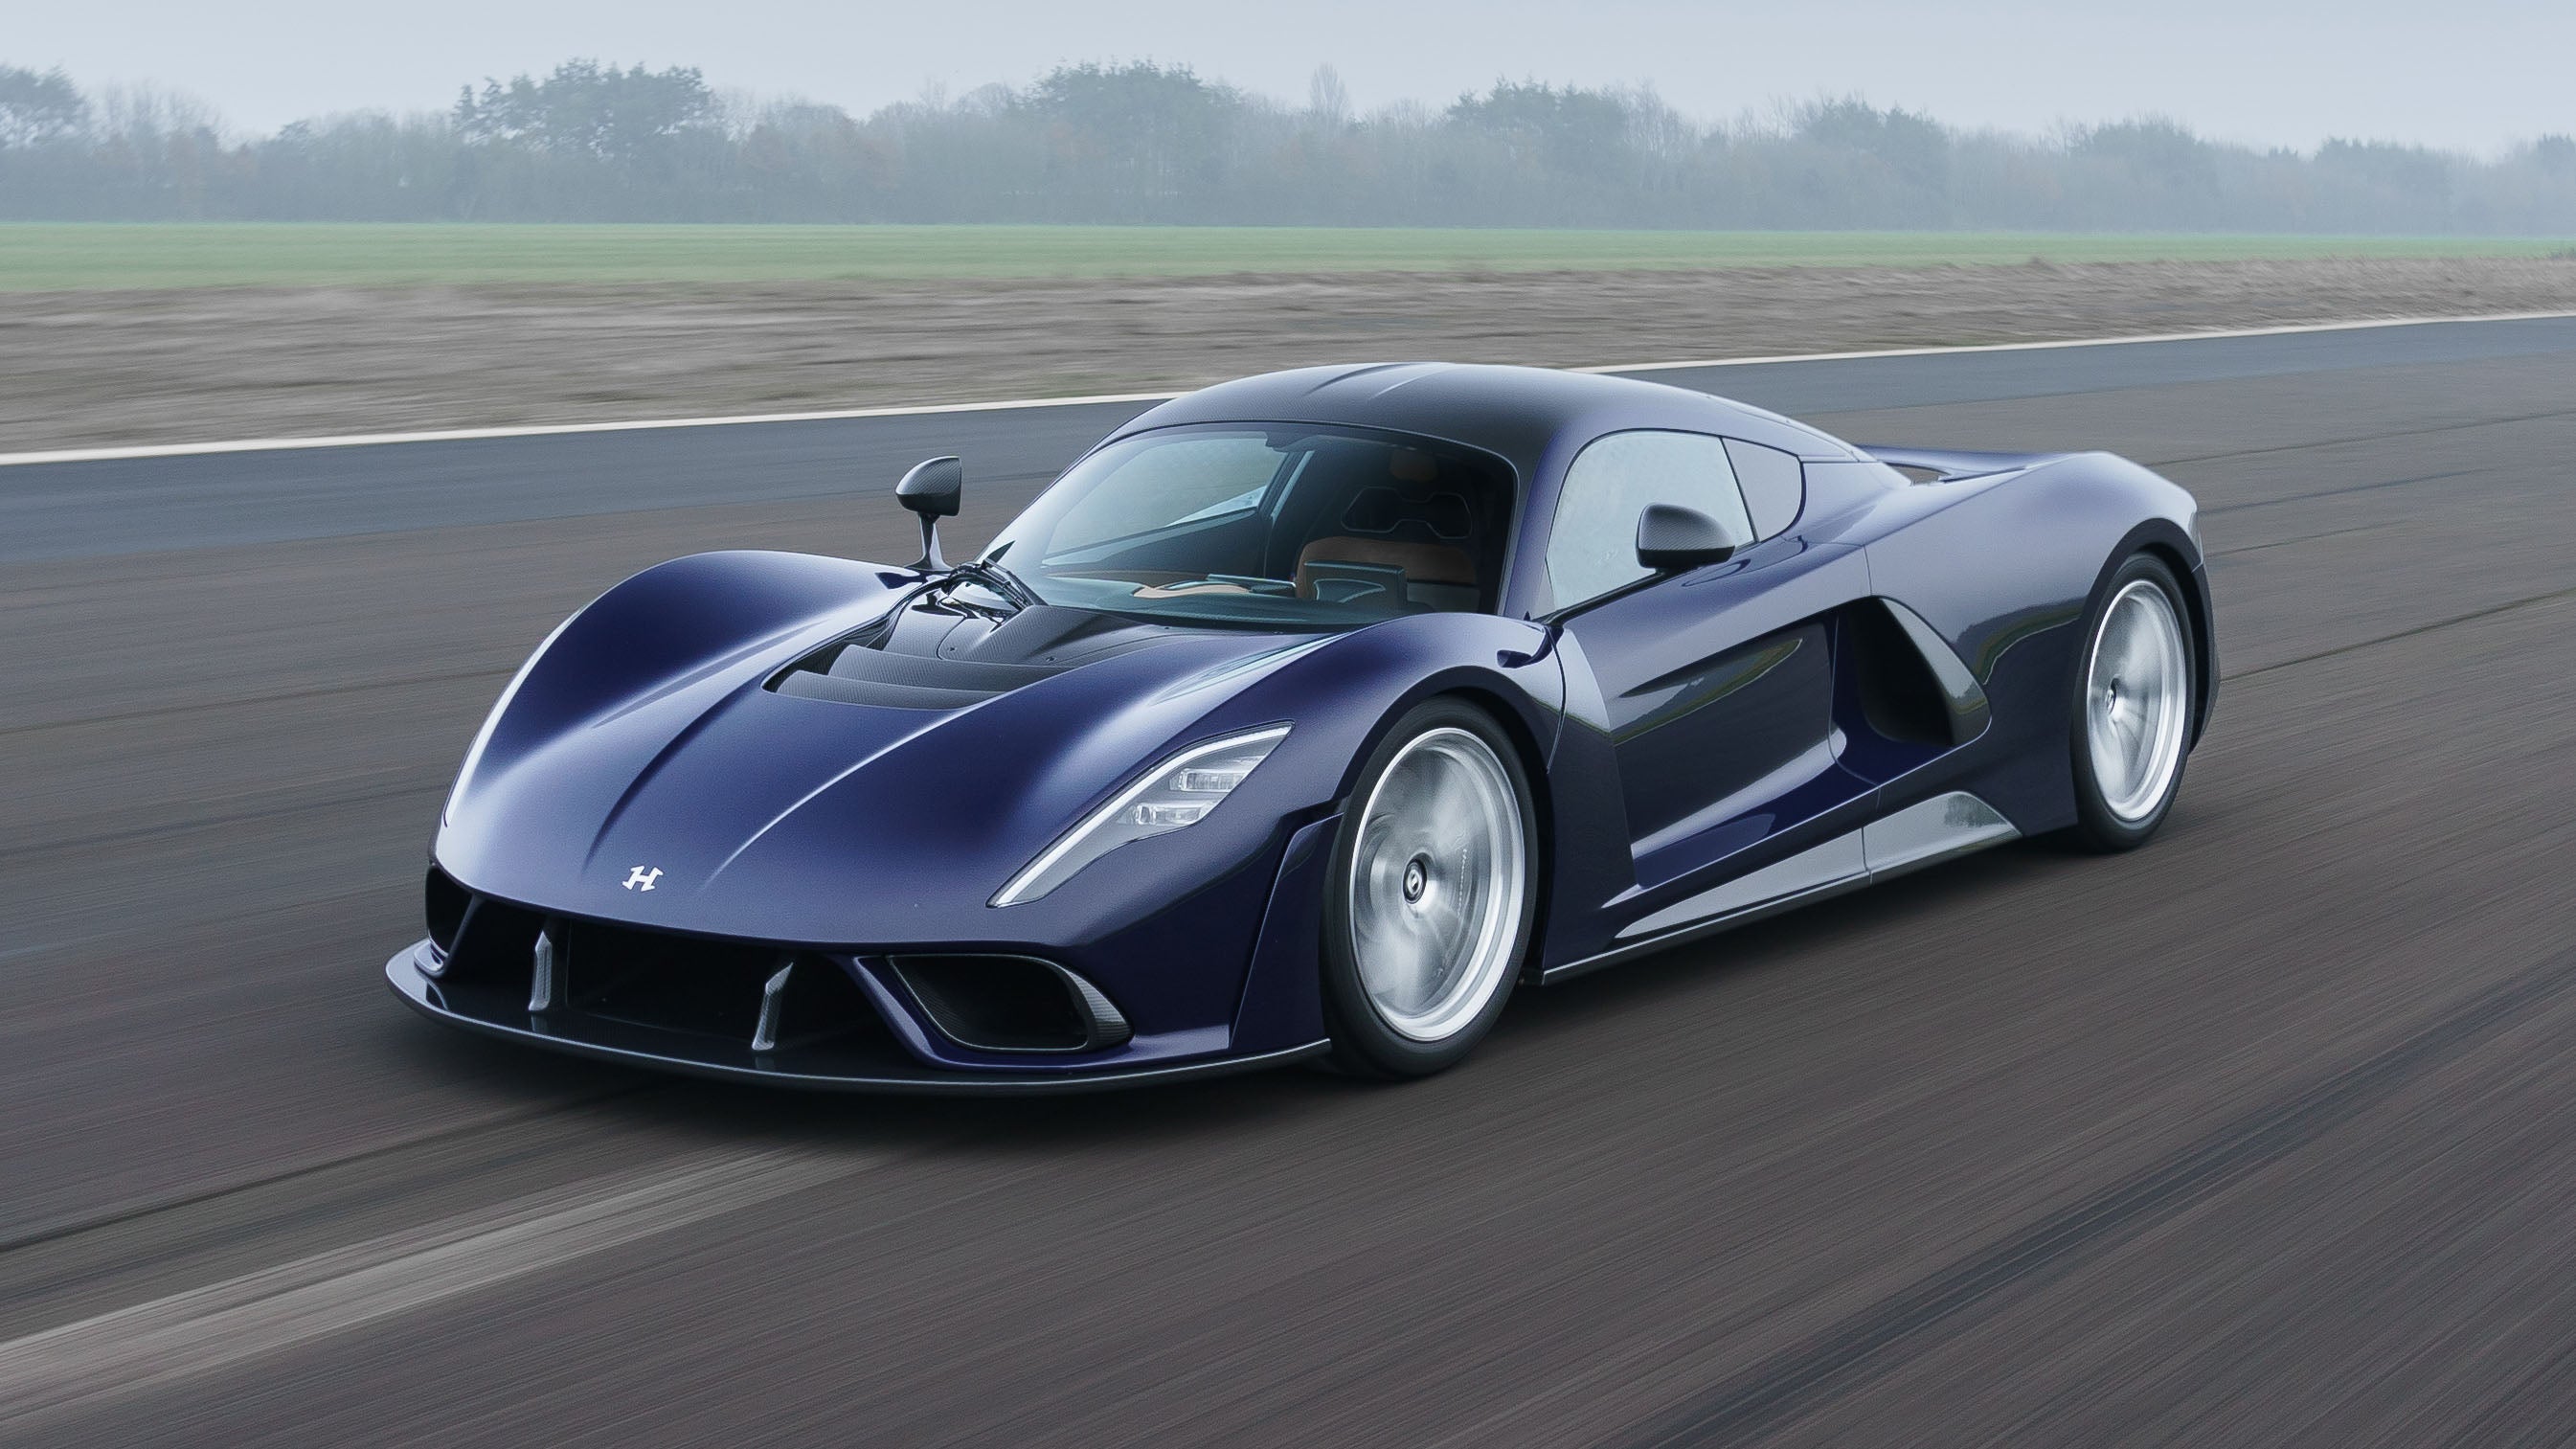 Fastest cars in the world: Hennessey Venom F5